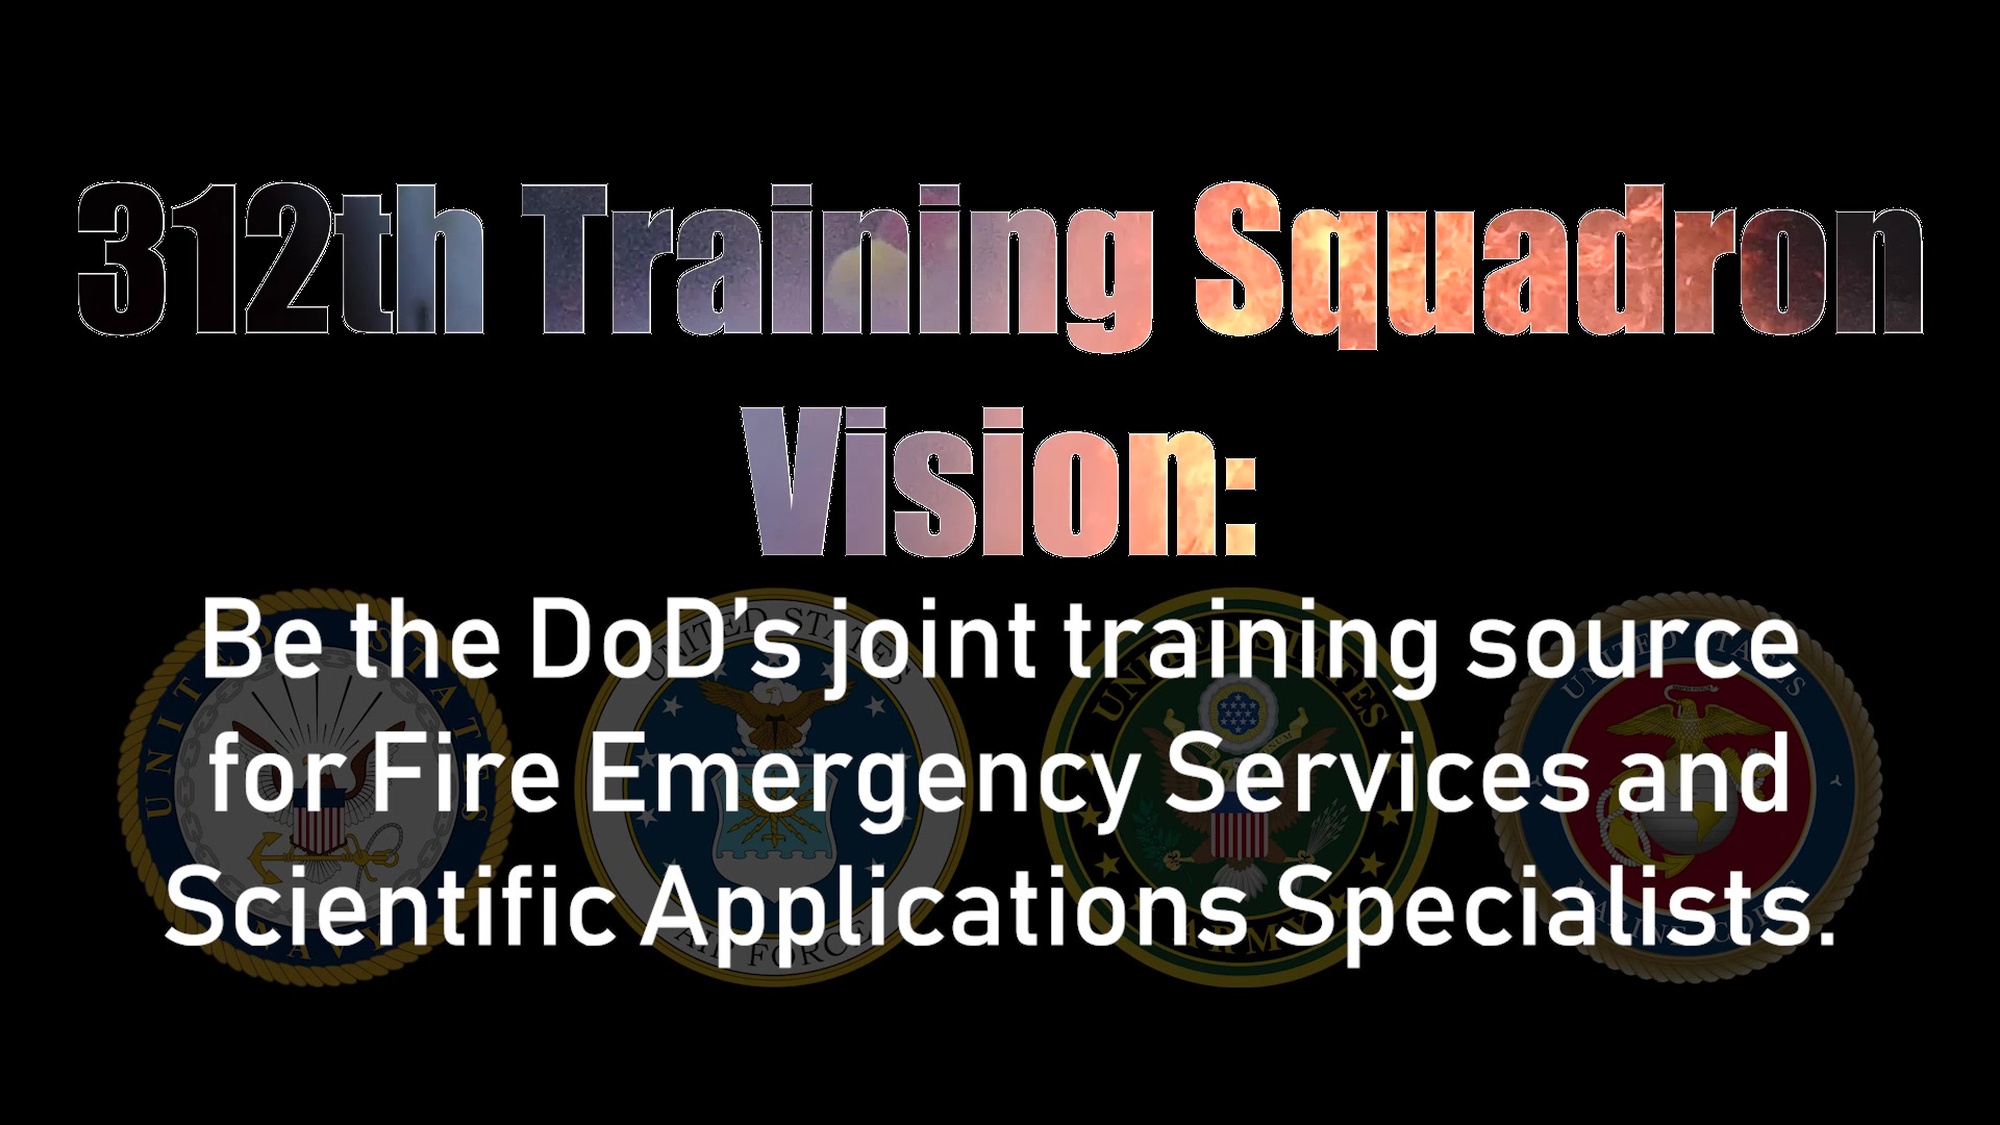 The 312th Training Squadron, a part of the 17th Training Group has a diverse mission.  They Train, Develop, and Inspire warriors to deliver Fire Emergency Services and Nuclear Treaty Monitoring for the DOD and our international partners.